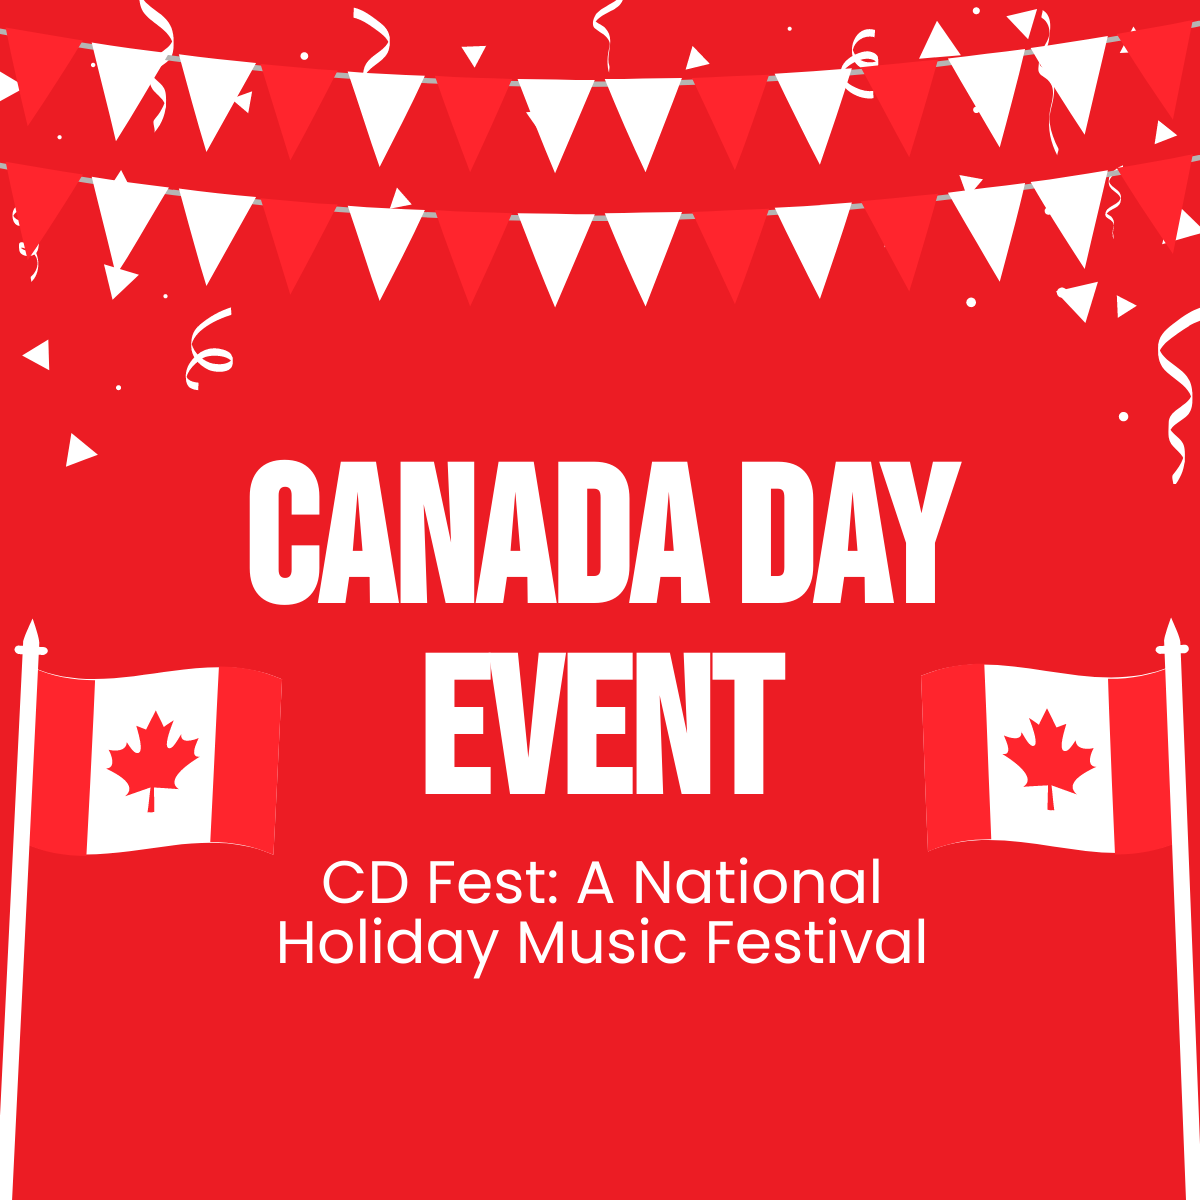 Canada Day Event Linkedin Post Template